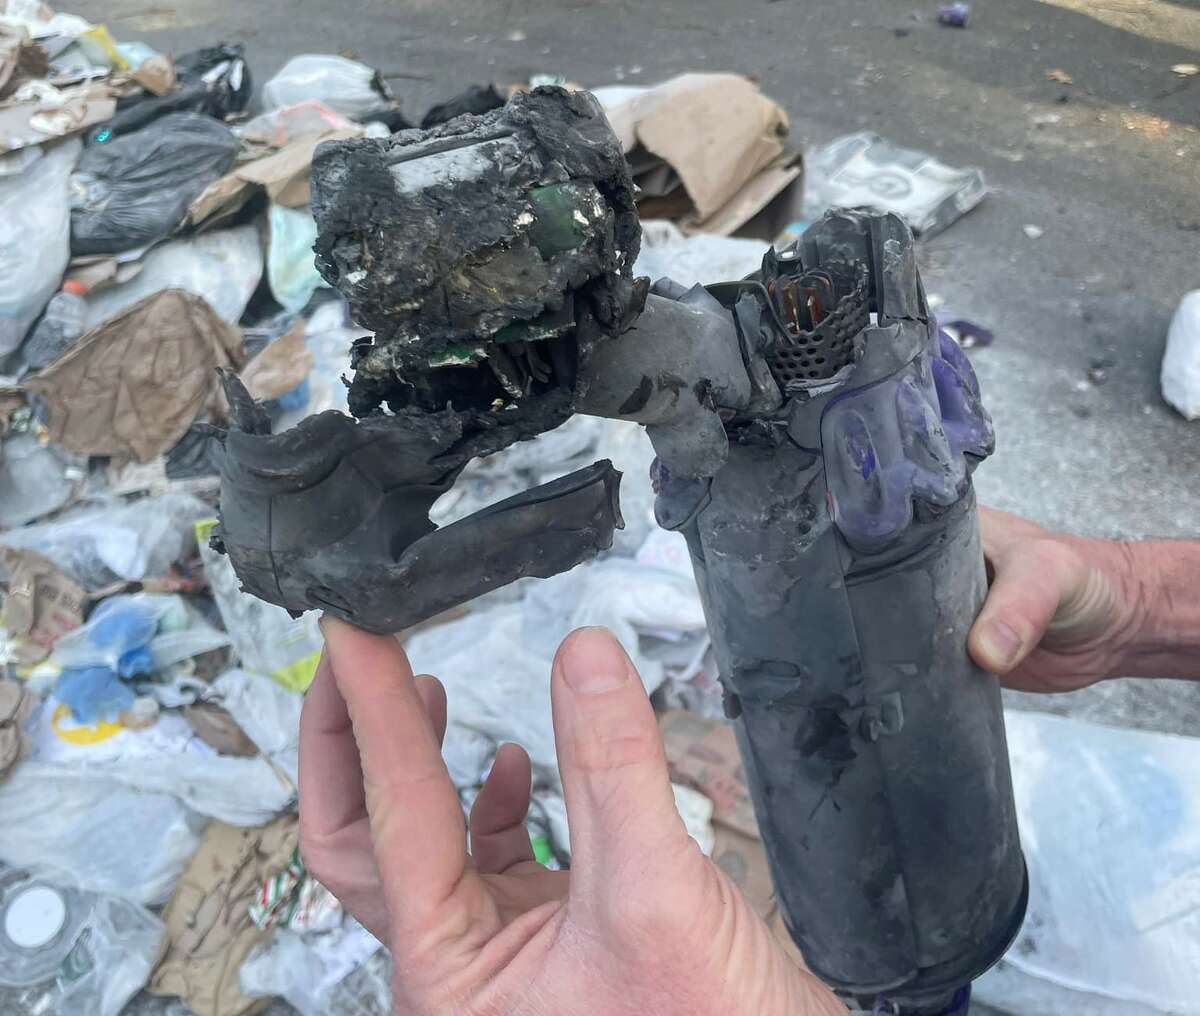 Westport fire officials said a small fire in a garbage truck was started by a lithium battery from a vacuum cleaner. The driver was able to extinguish the blaze after dumping out the truck's load.